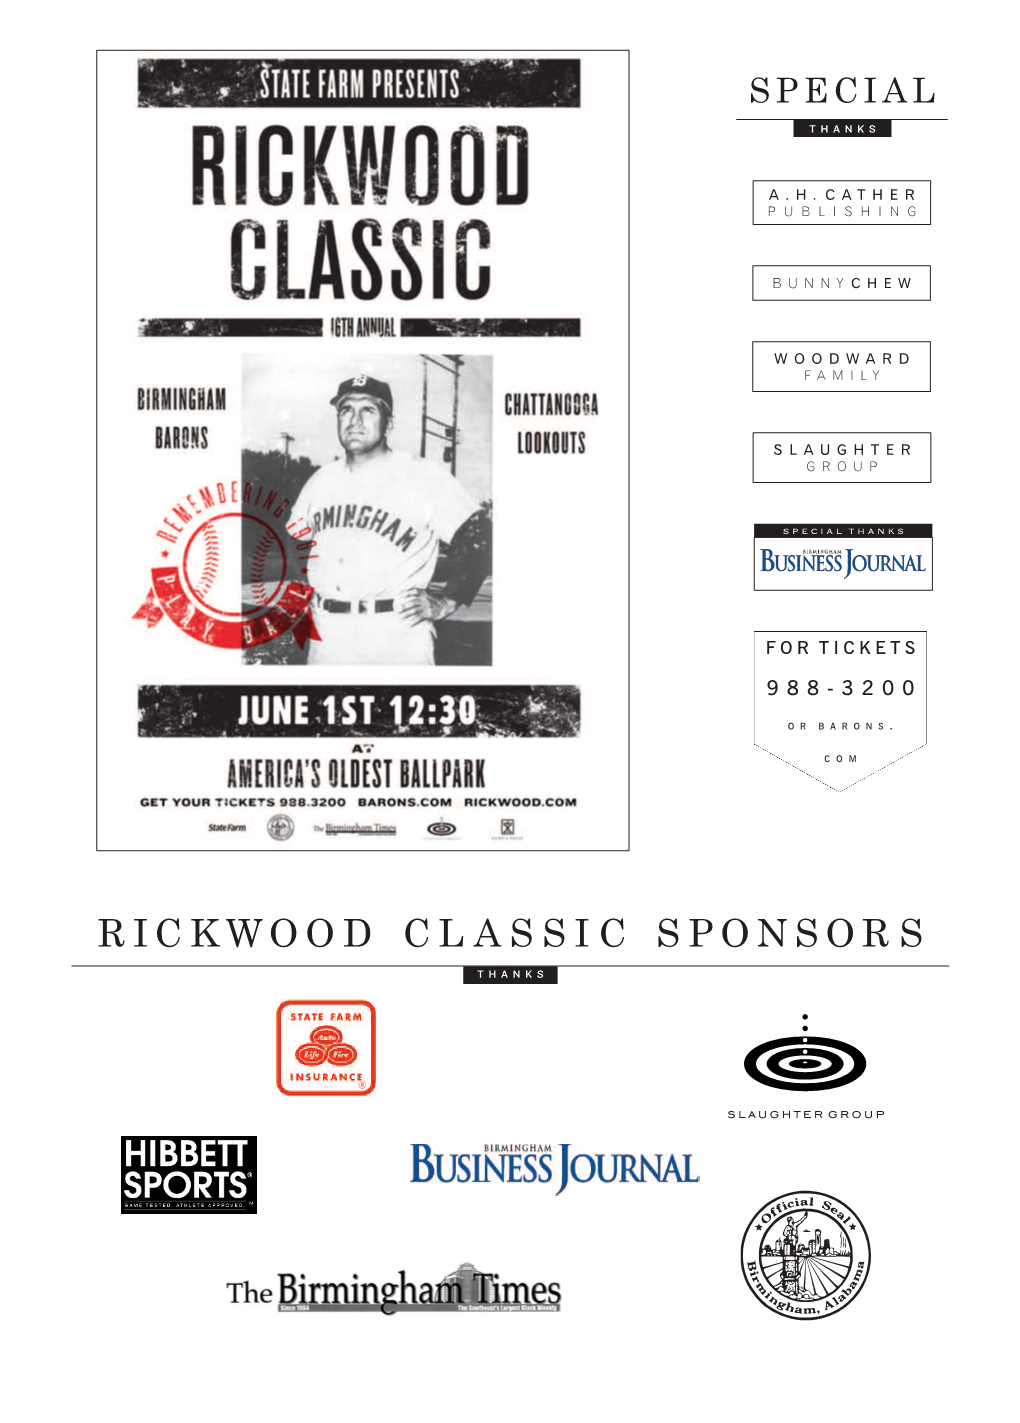 Rickwood Field’S Centennial Hall of Fame Member GAYLORD PERRY to Headline 2011 Rickwood Classic